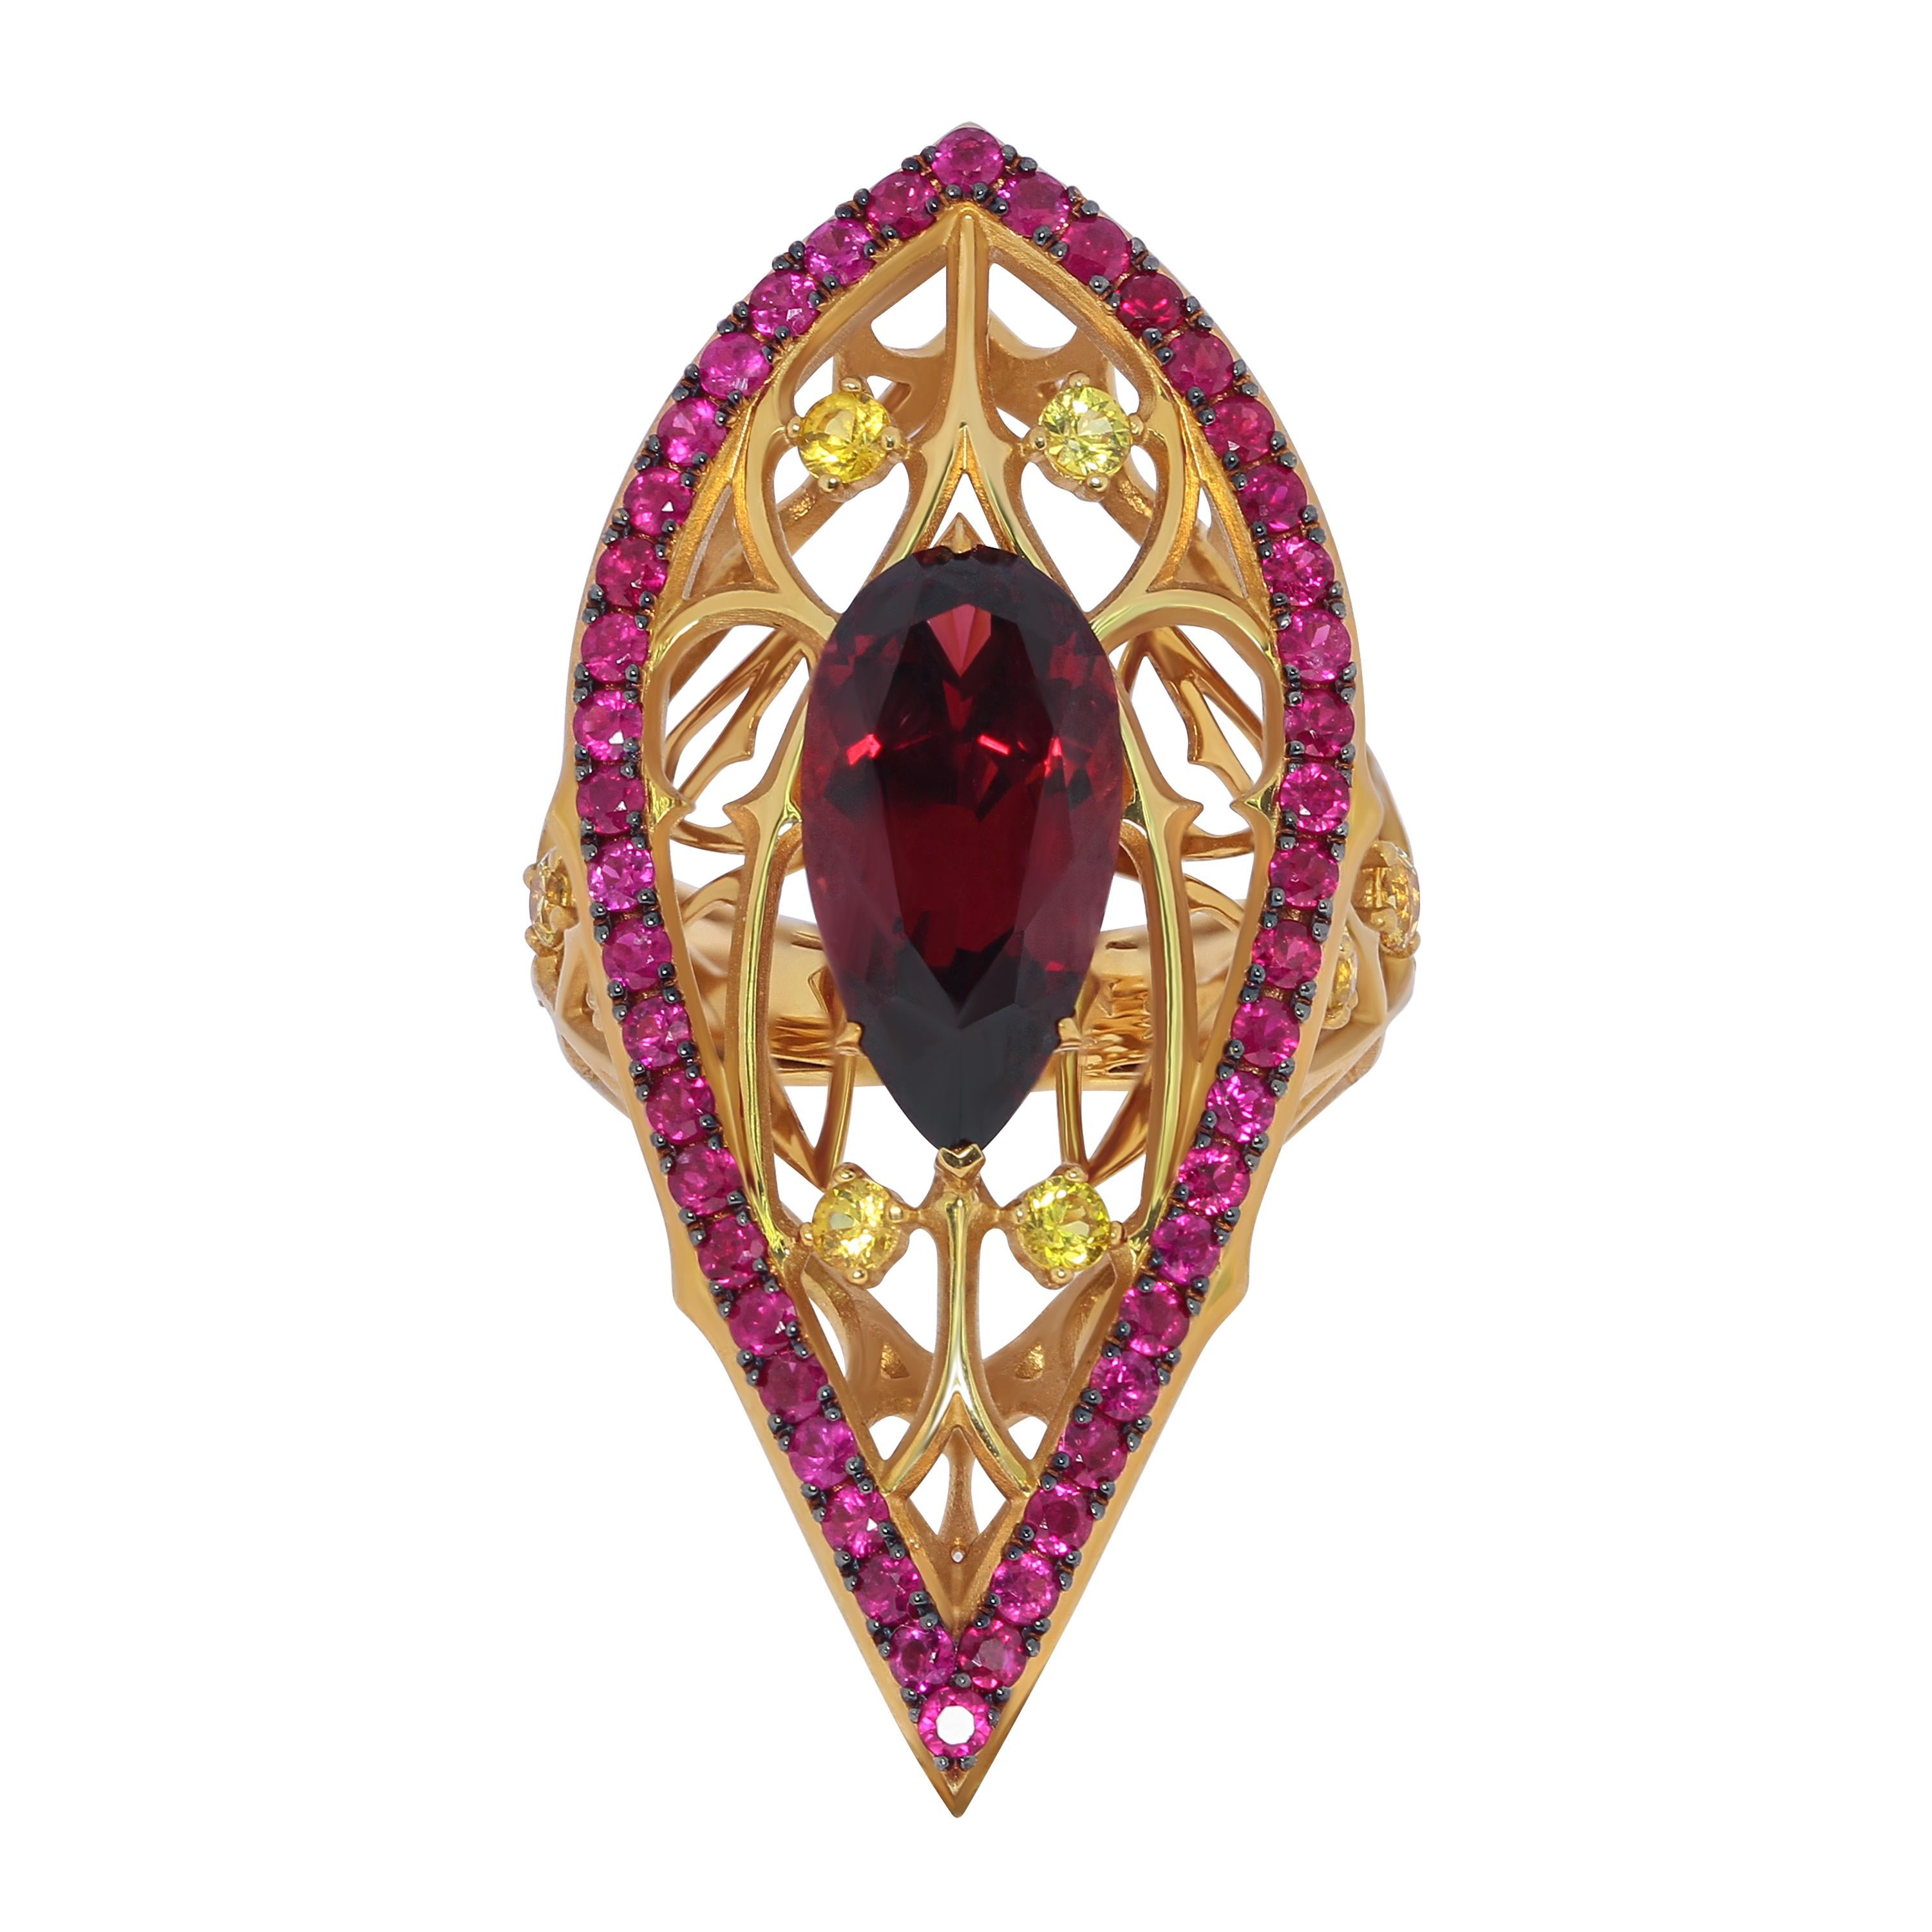 Garnet 4.38 Carat Ruby Sapphire 18 Karat Yellow Gold Gothic Ring
Imagine a Gothic cathedral with all its grace, upward aspiration and colorful stained glass windows. At the idea of this collection, our designers were inspired by all this beauty. The